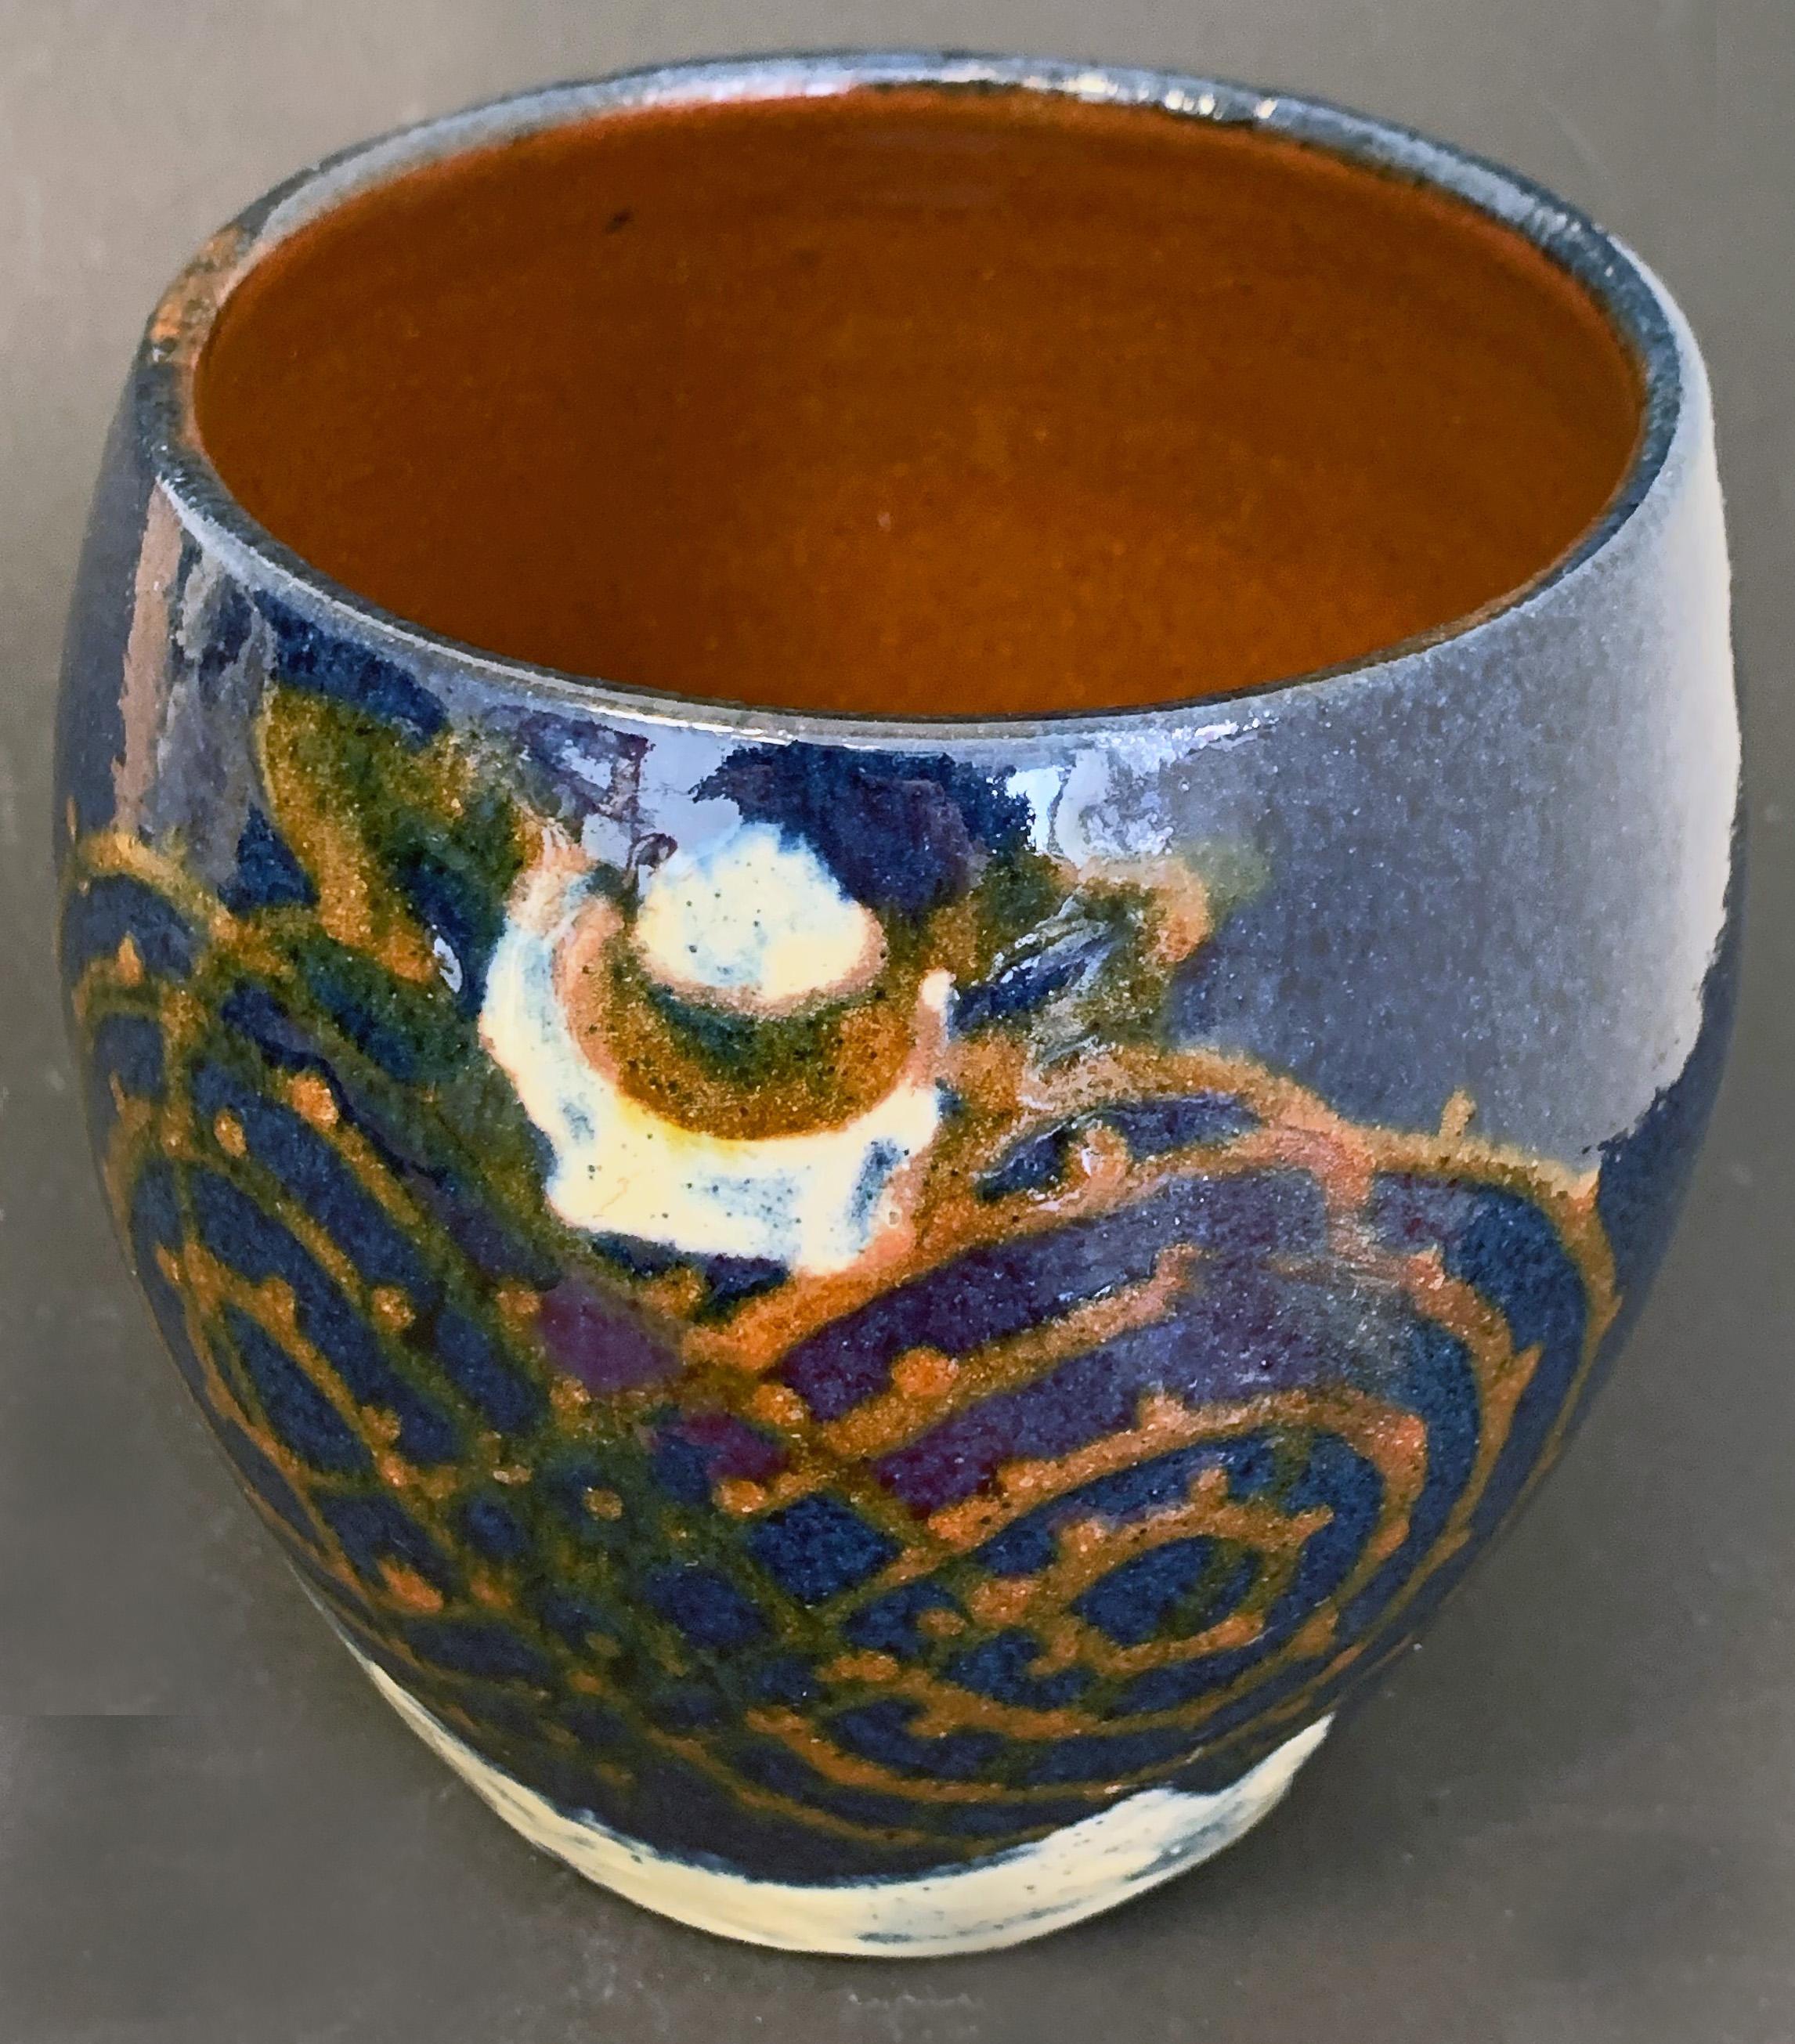 Possibly by the Primavera workshop established by Le Printemps department store in Paris, this marvelous vase is executed in deep blue and orange glazes, with splashes of ivory. Primavera was best known for its Art Deco and Moderne designs, though